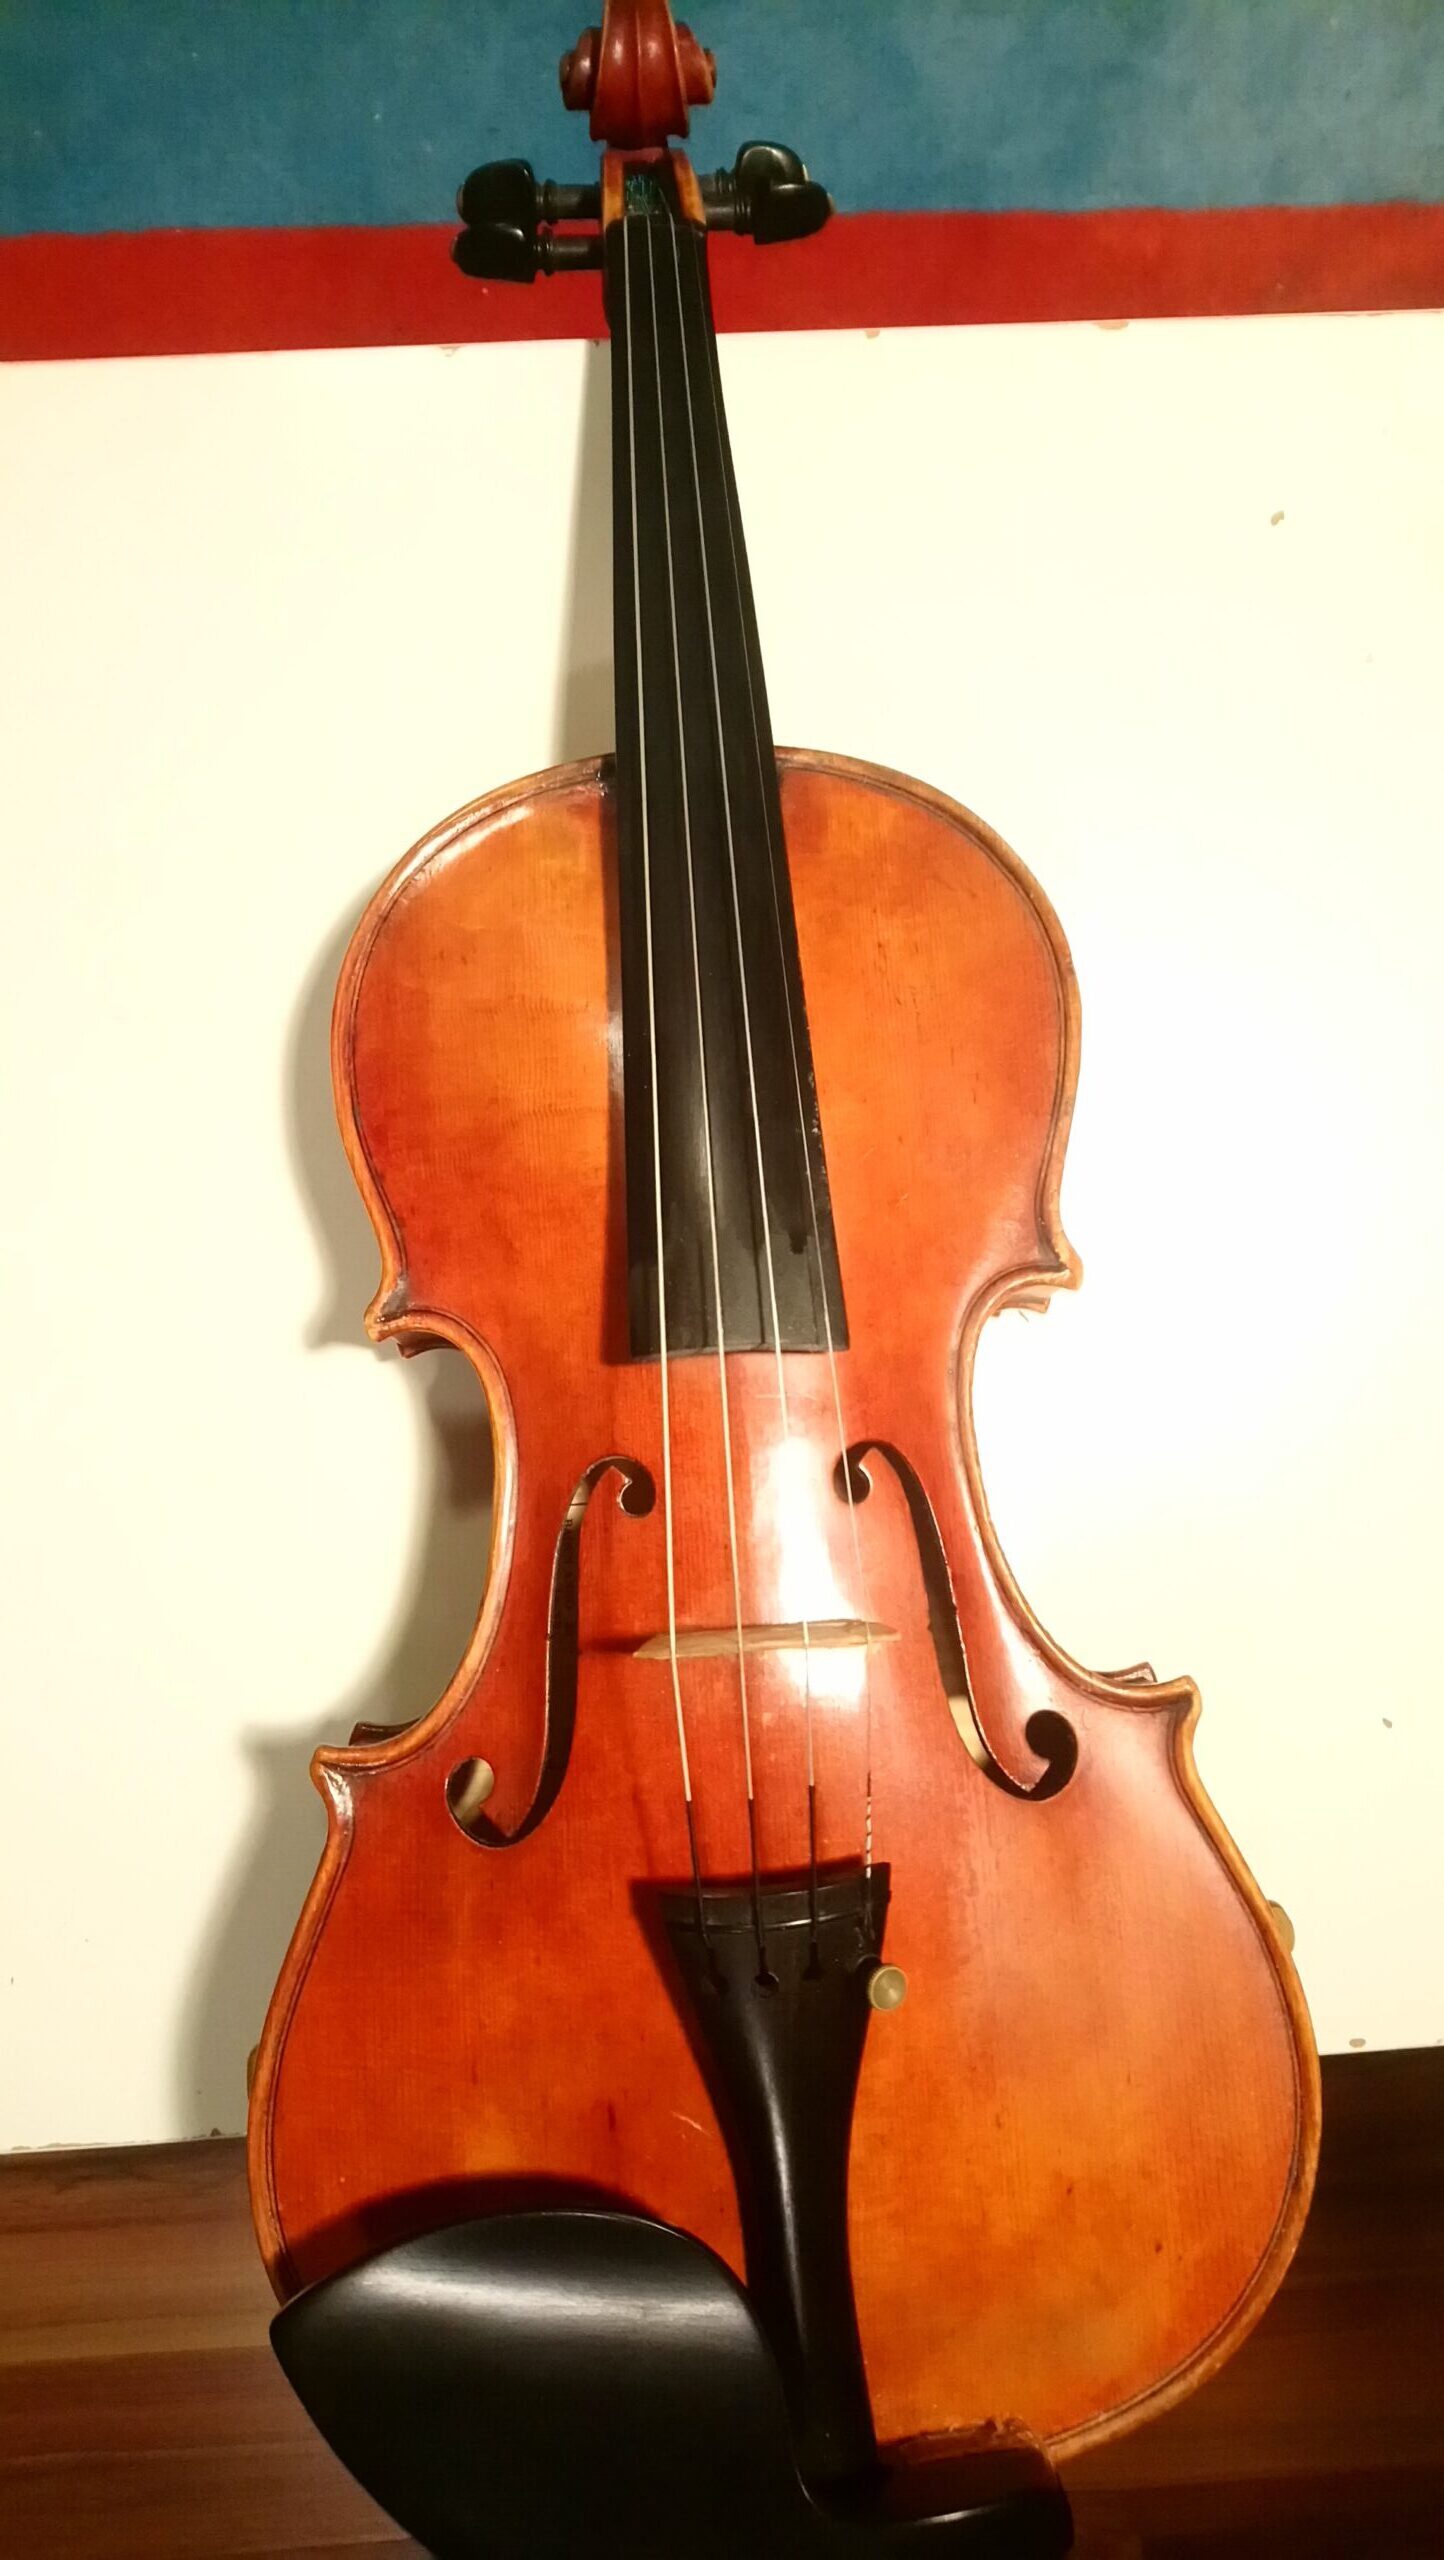 Violin treated with fungus is set against a wall